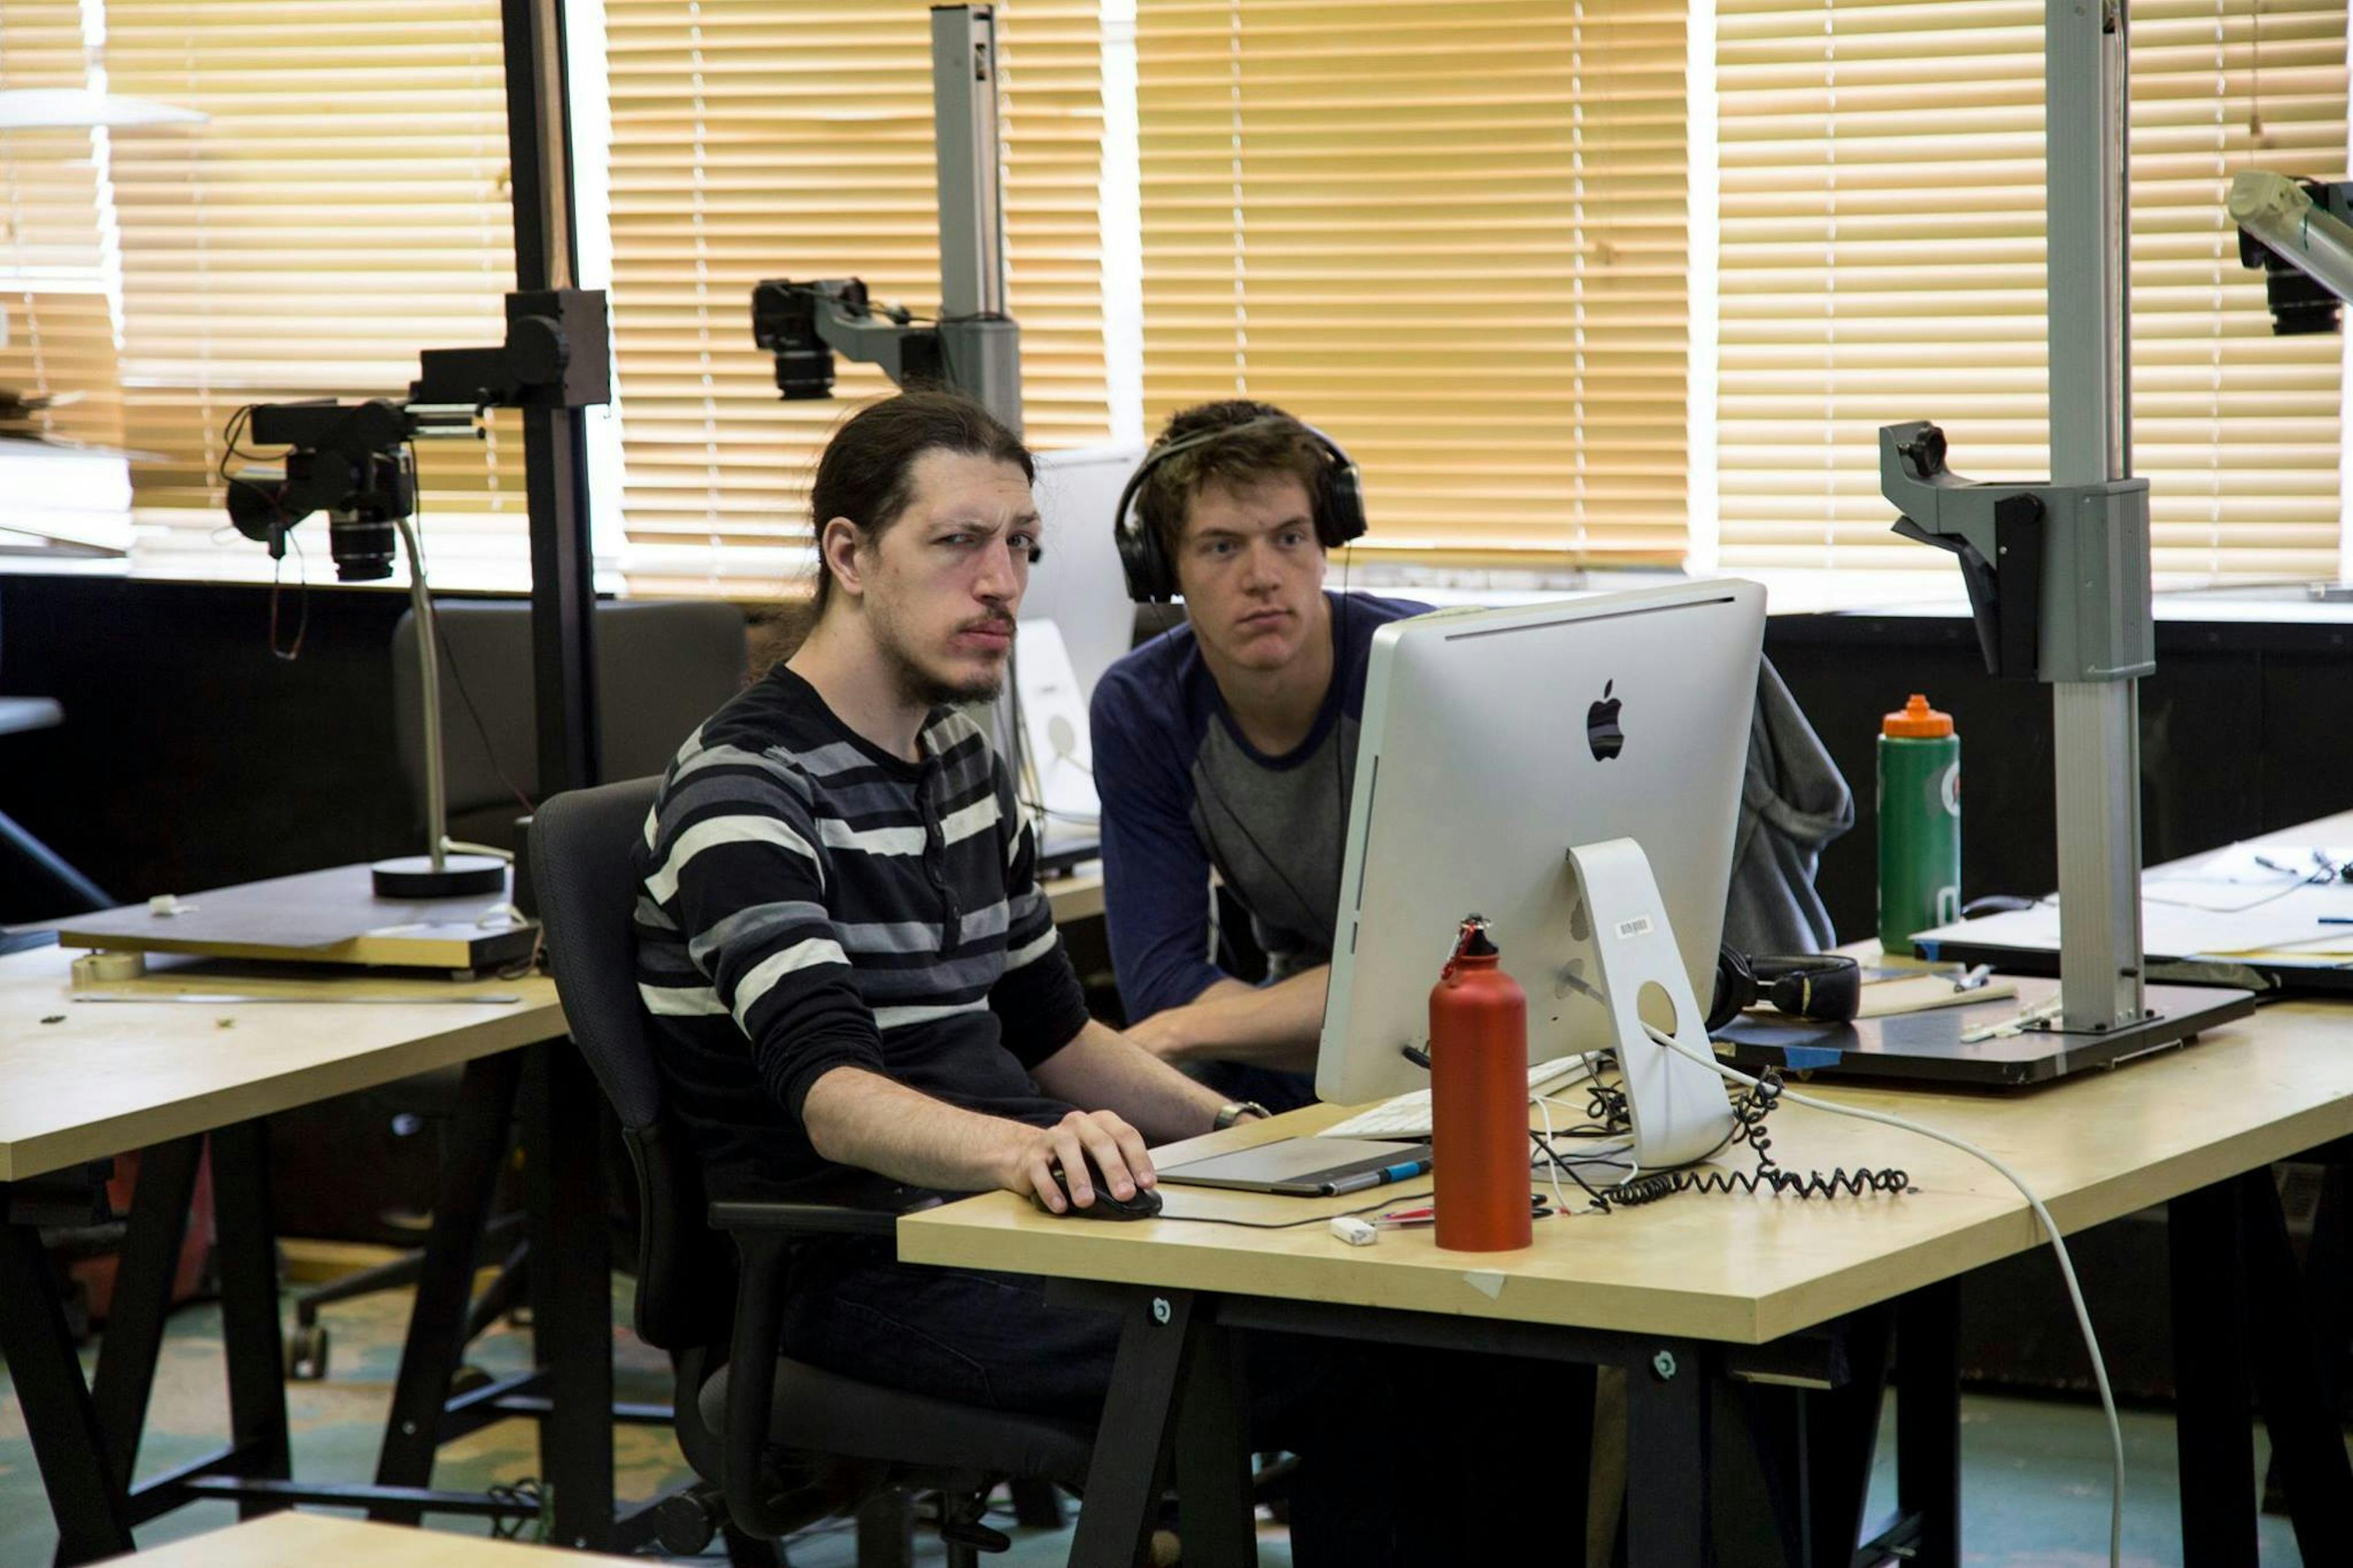 Will Walton and another animator sitting at a desk with an iMac and an animation stand. Will has long hair that is tied into a pony tail at the base of his neck. He has a moustache and beard, and is wearing a striped black and white shirt. He is looking at the camera with a raised eyebrow. Next to him the other animator is looking studiously at the computer while wearing headphones 